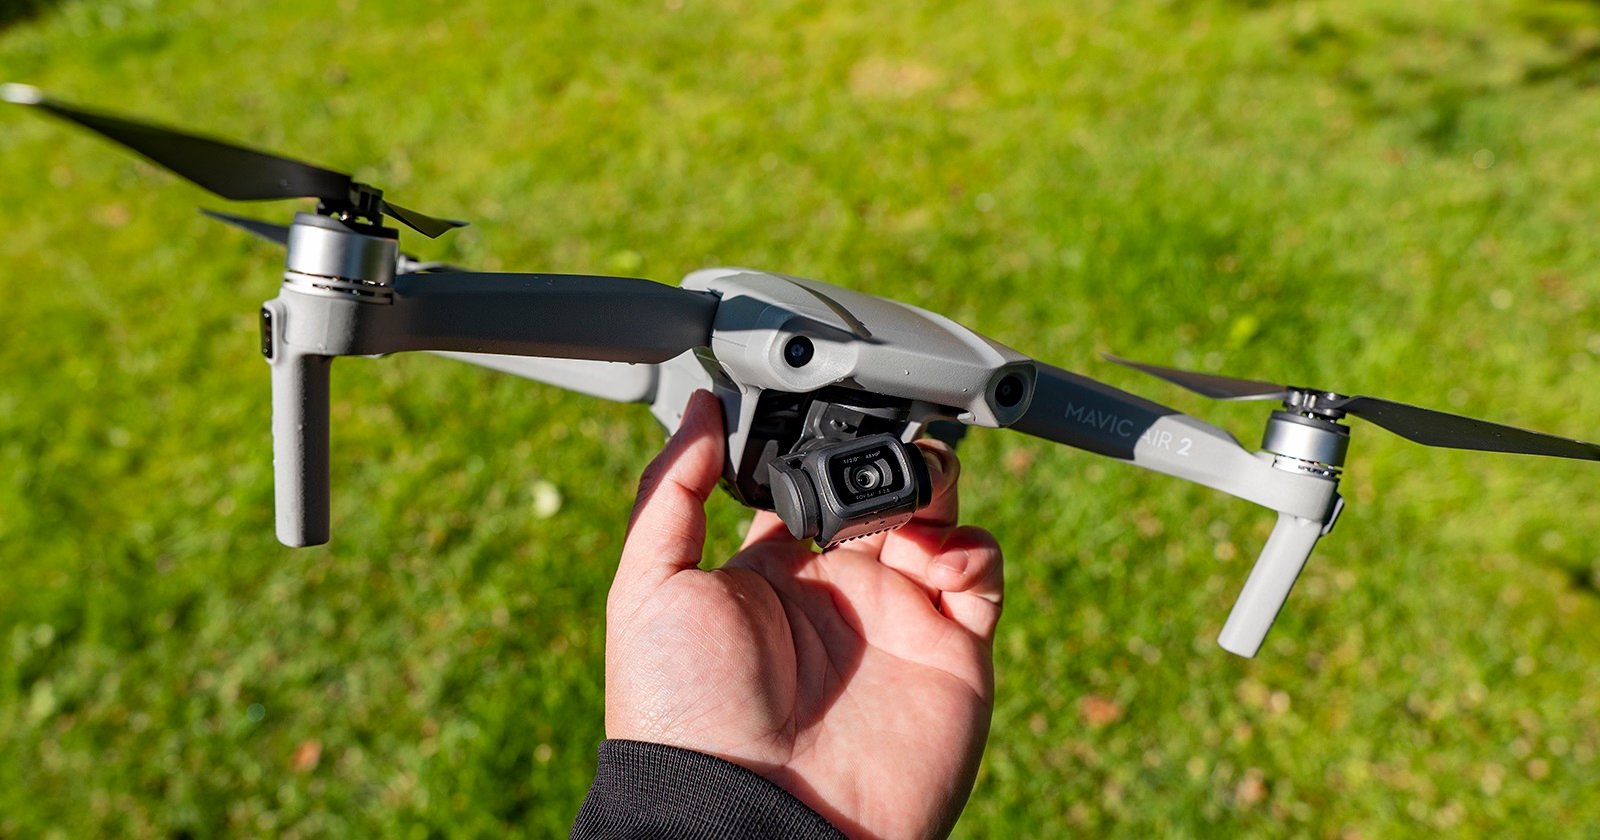 DJI's new Mavic Air 2 firmware update allows for 4x zoom, 4K hyperlapse,  and more: Digital Photography Review